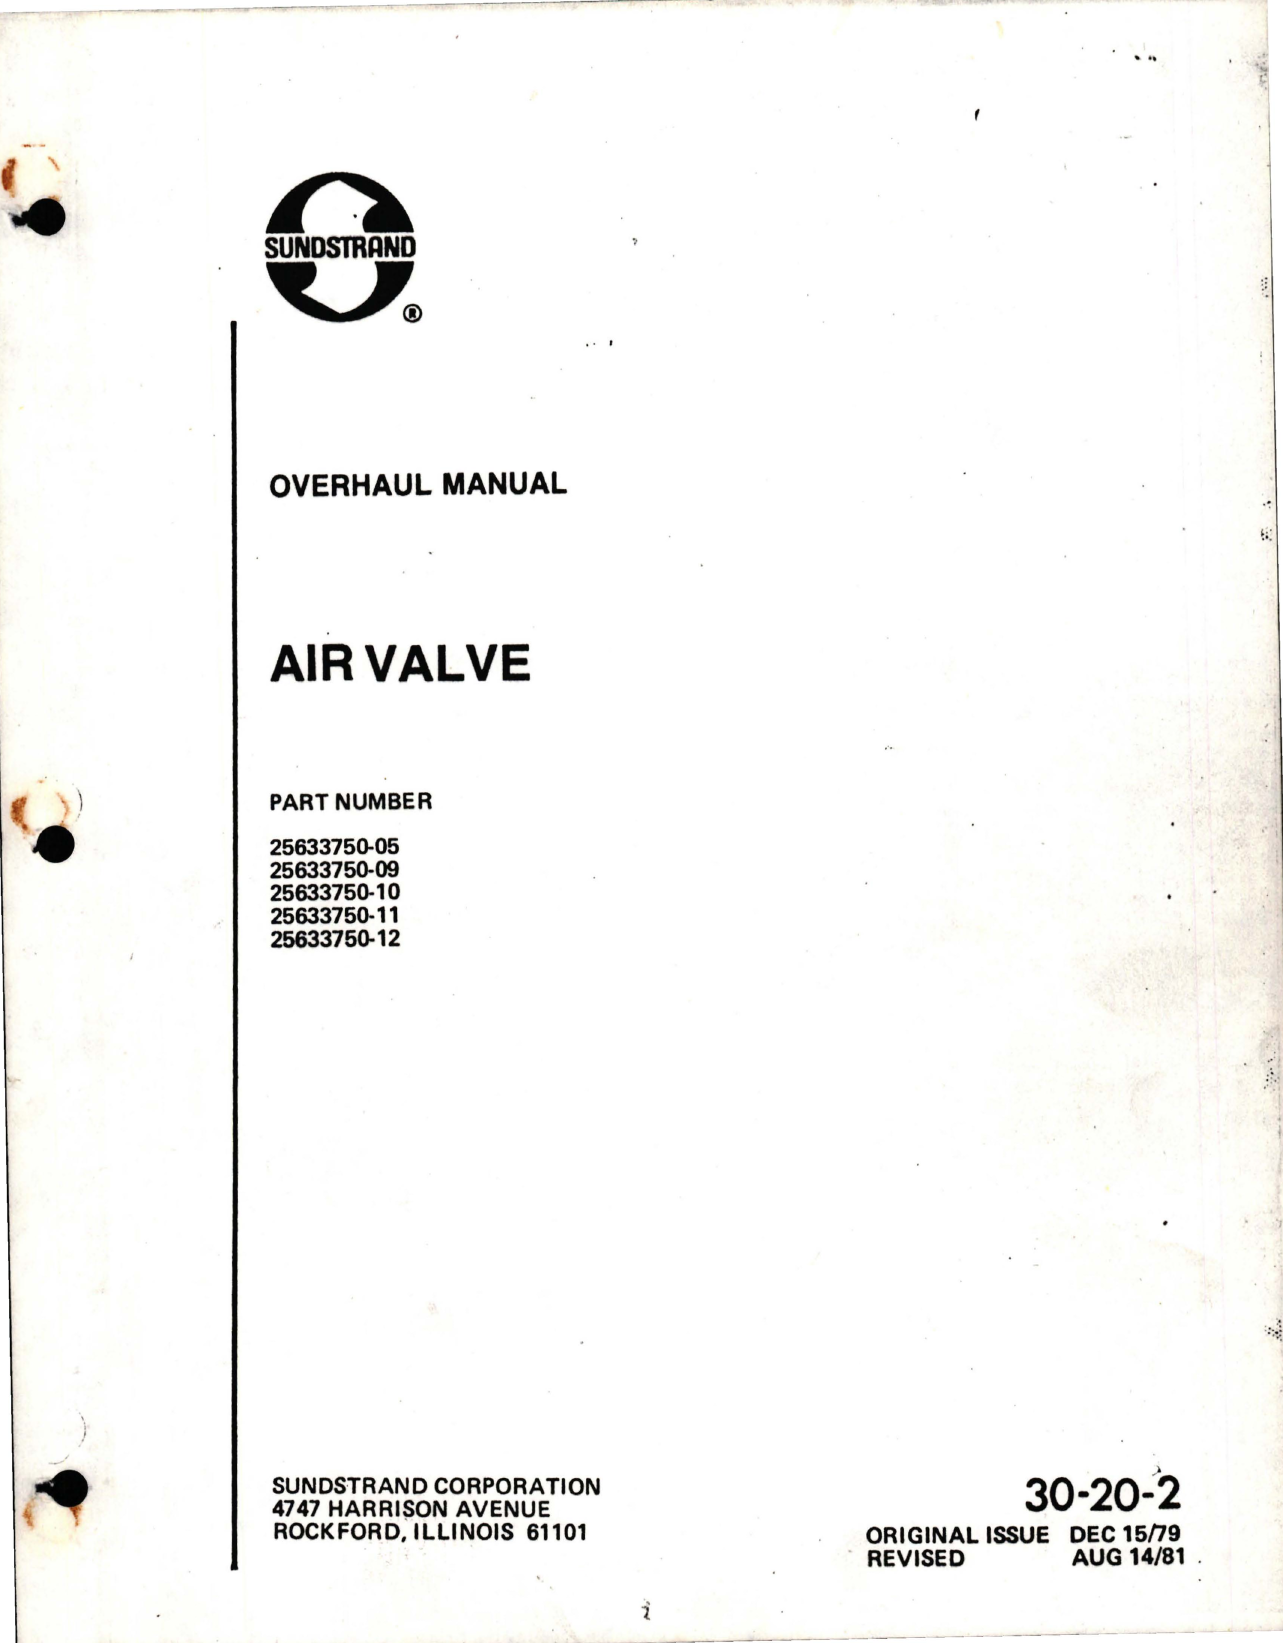 Sample page 1 from AirCorps Library document: Overhaul Manual for Air Valve